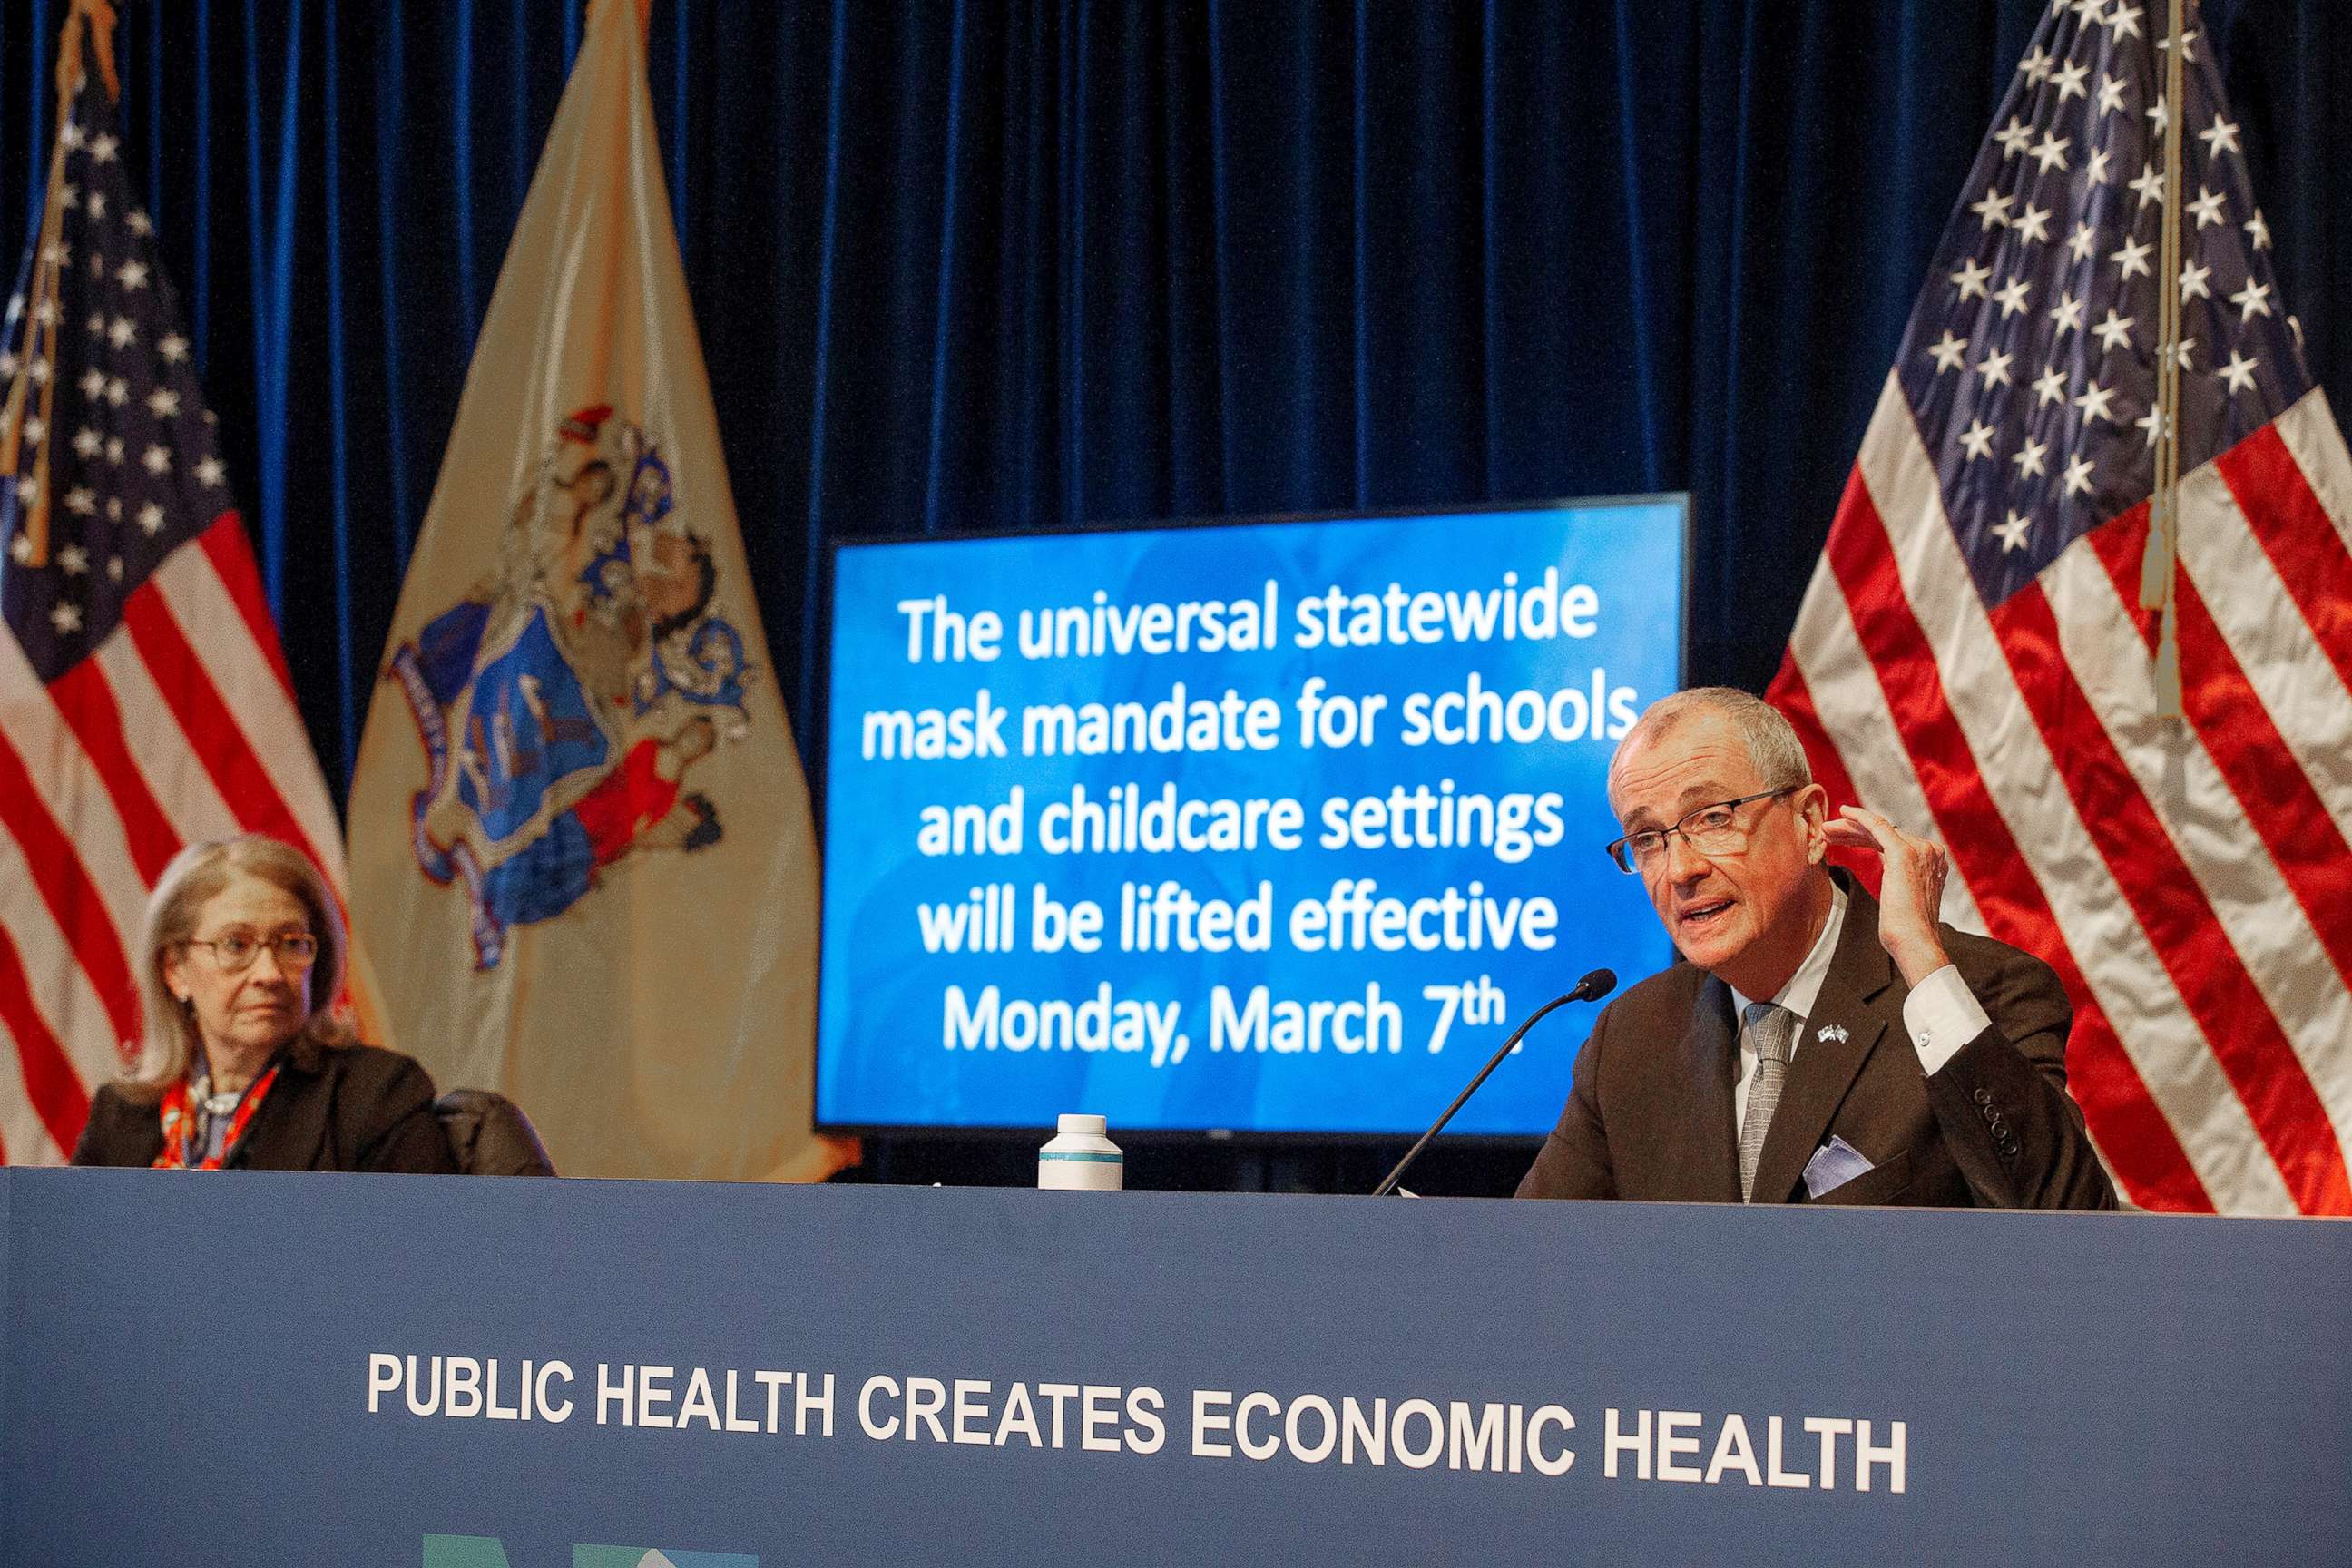 PHOTO: Governor Phil Murphy announces that masks will no longer be mandated for students, staff, or visitors in schools and childcare centers effective March 7 during a coronavirus briefing in Trenton, N.J., Feb. 7, 2022.